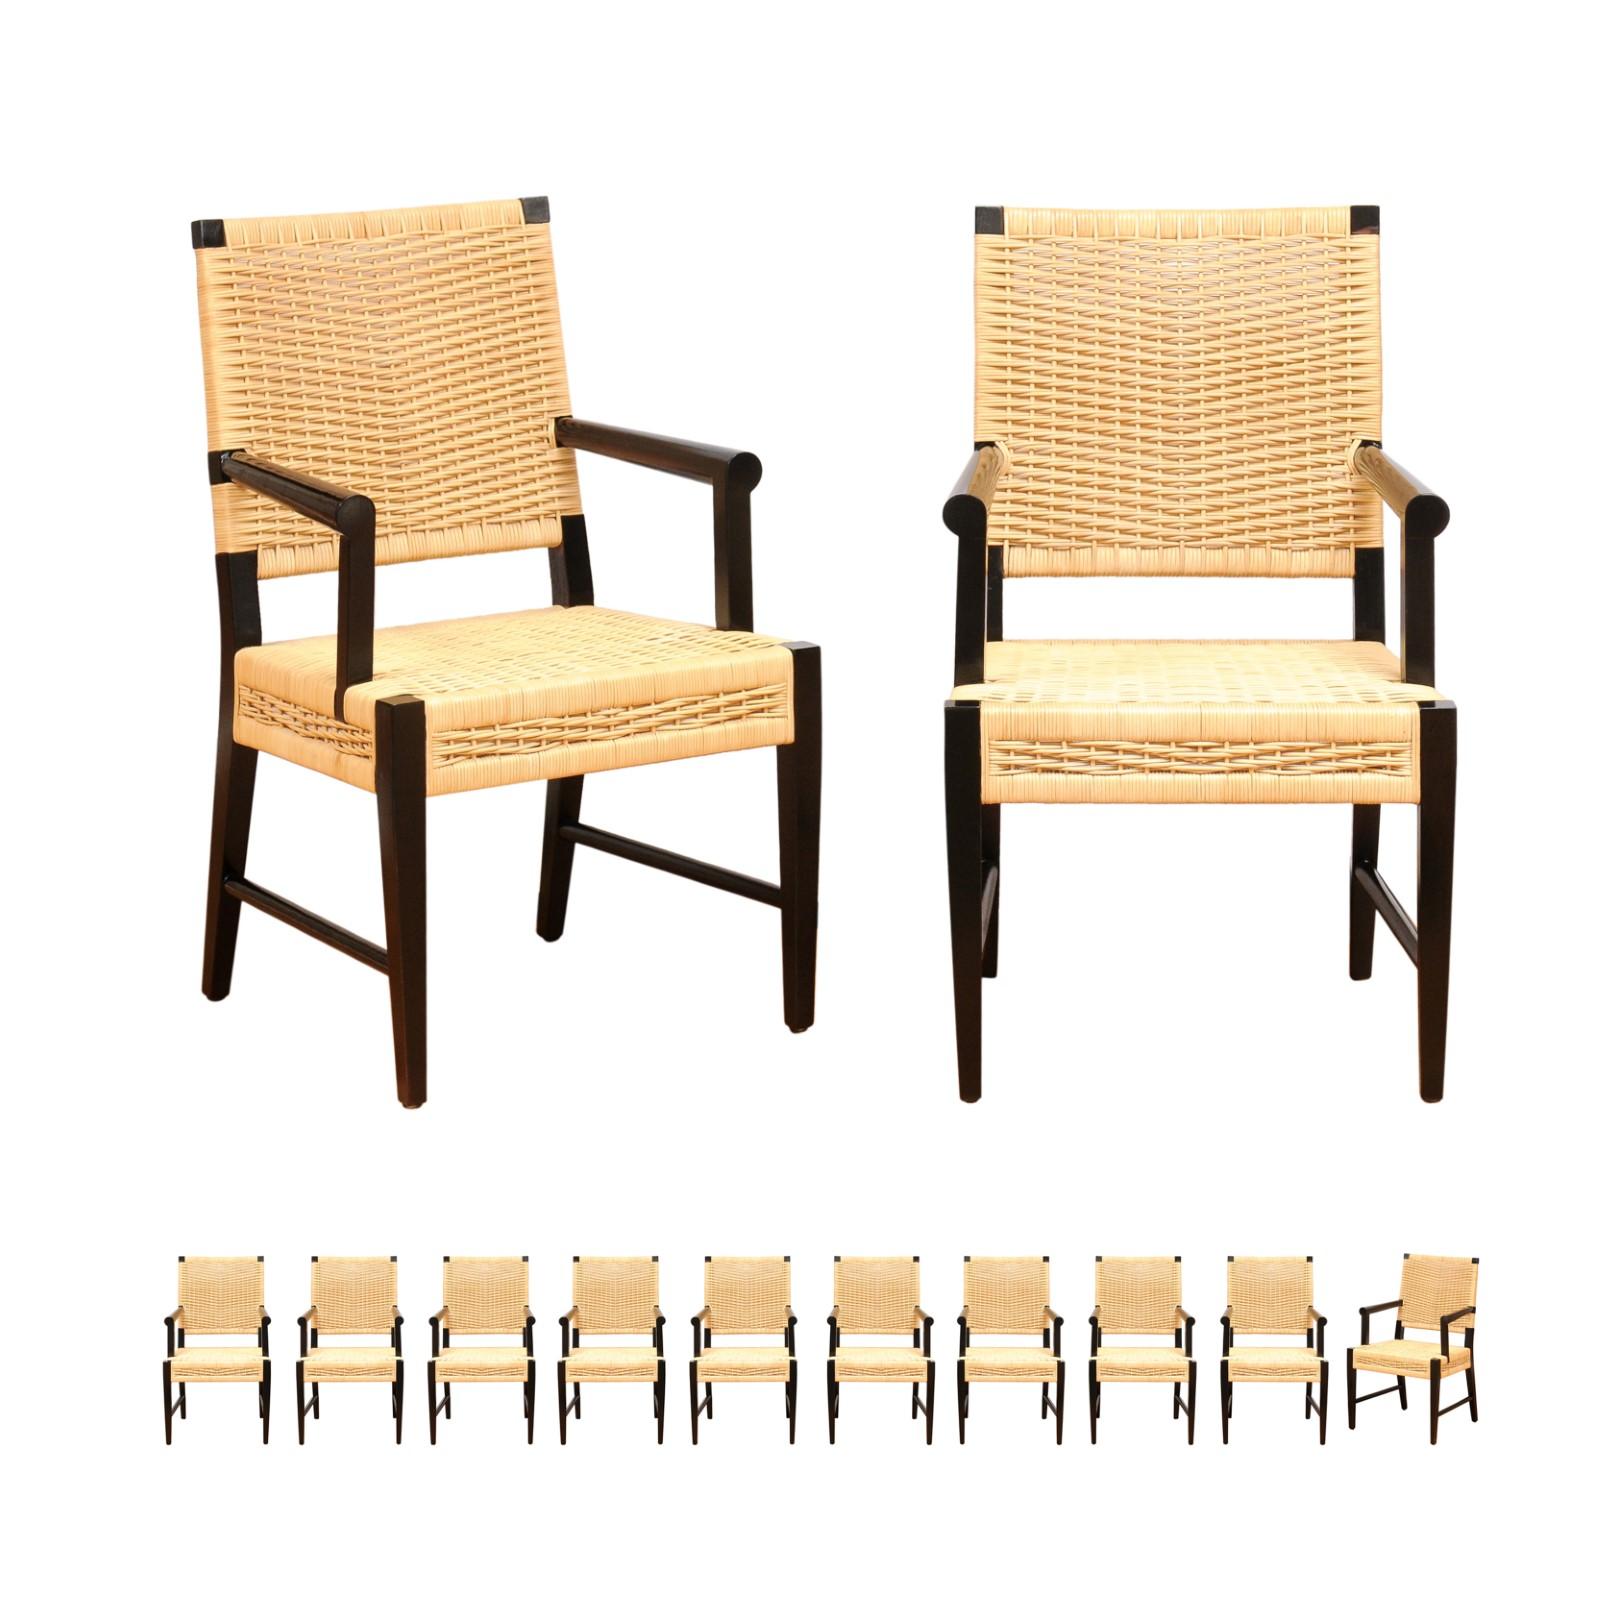 Remarkable Set of 12 Mahogany and Cane Arm Chairs by John Hutton for Donghia For Sale 13